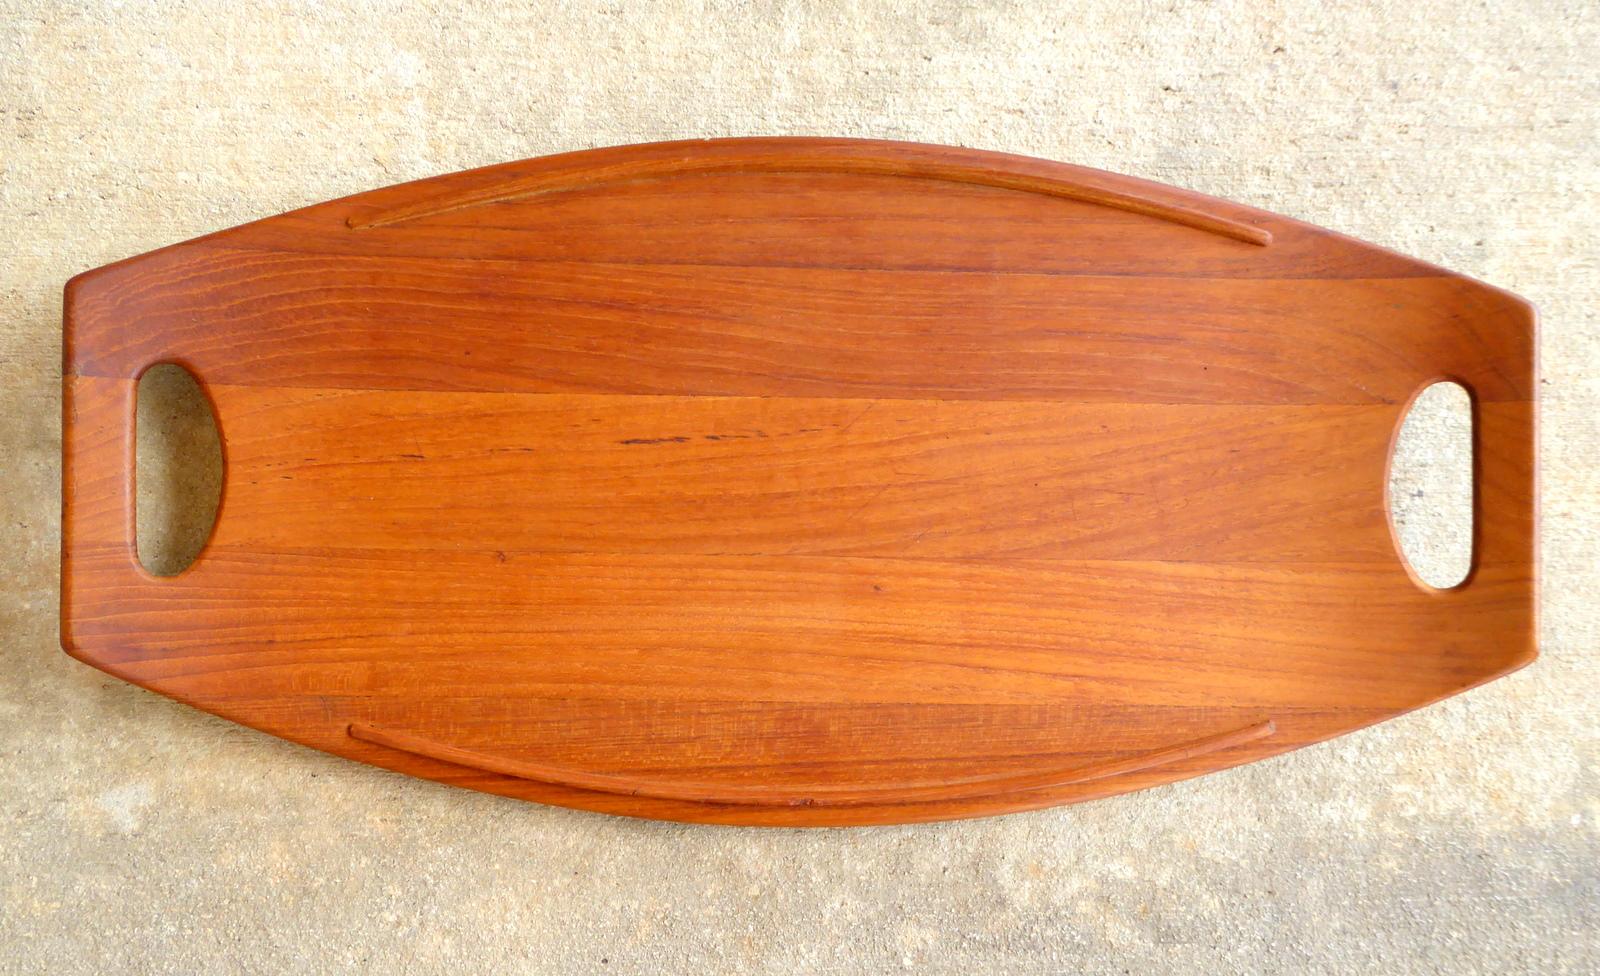 Nesting Set of Three Staved Teak Trays by Jens Quistgaard for Dansk In Good Condition For Sale In Palm Beach Gardens, FL